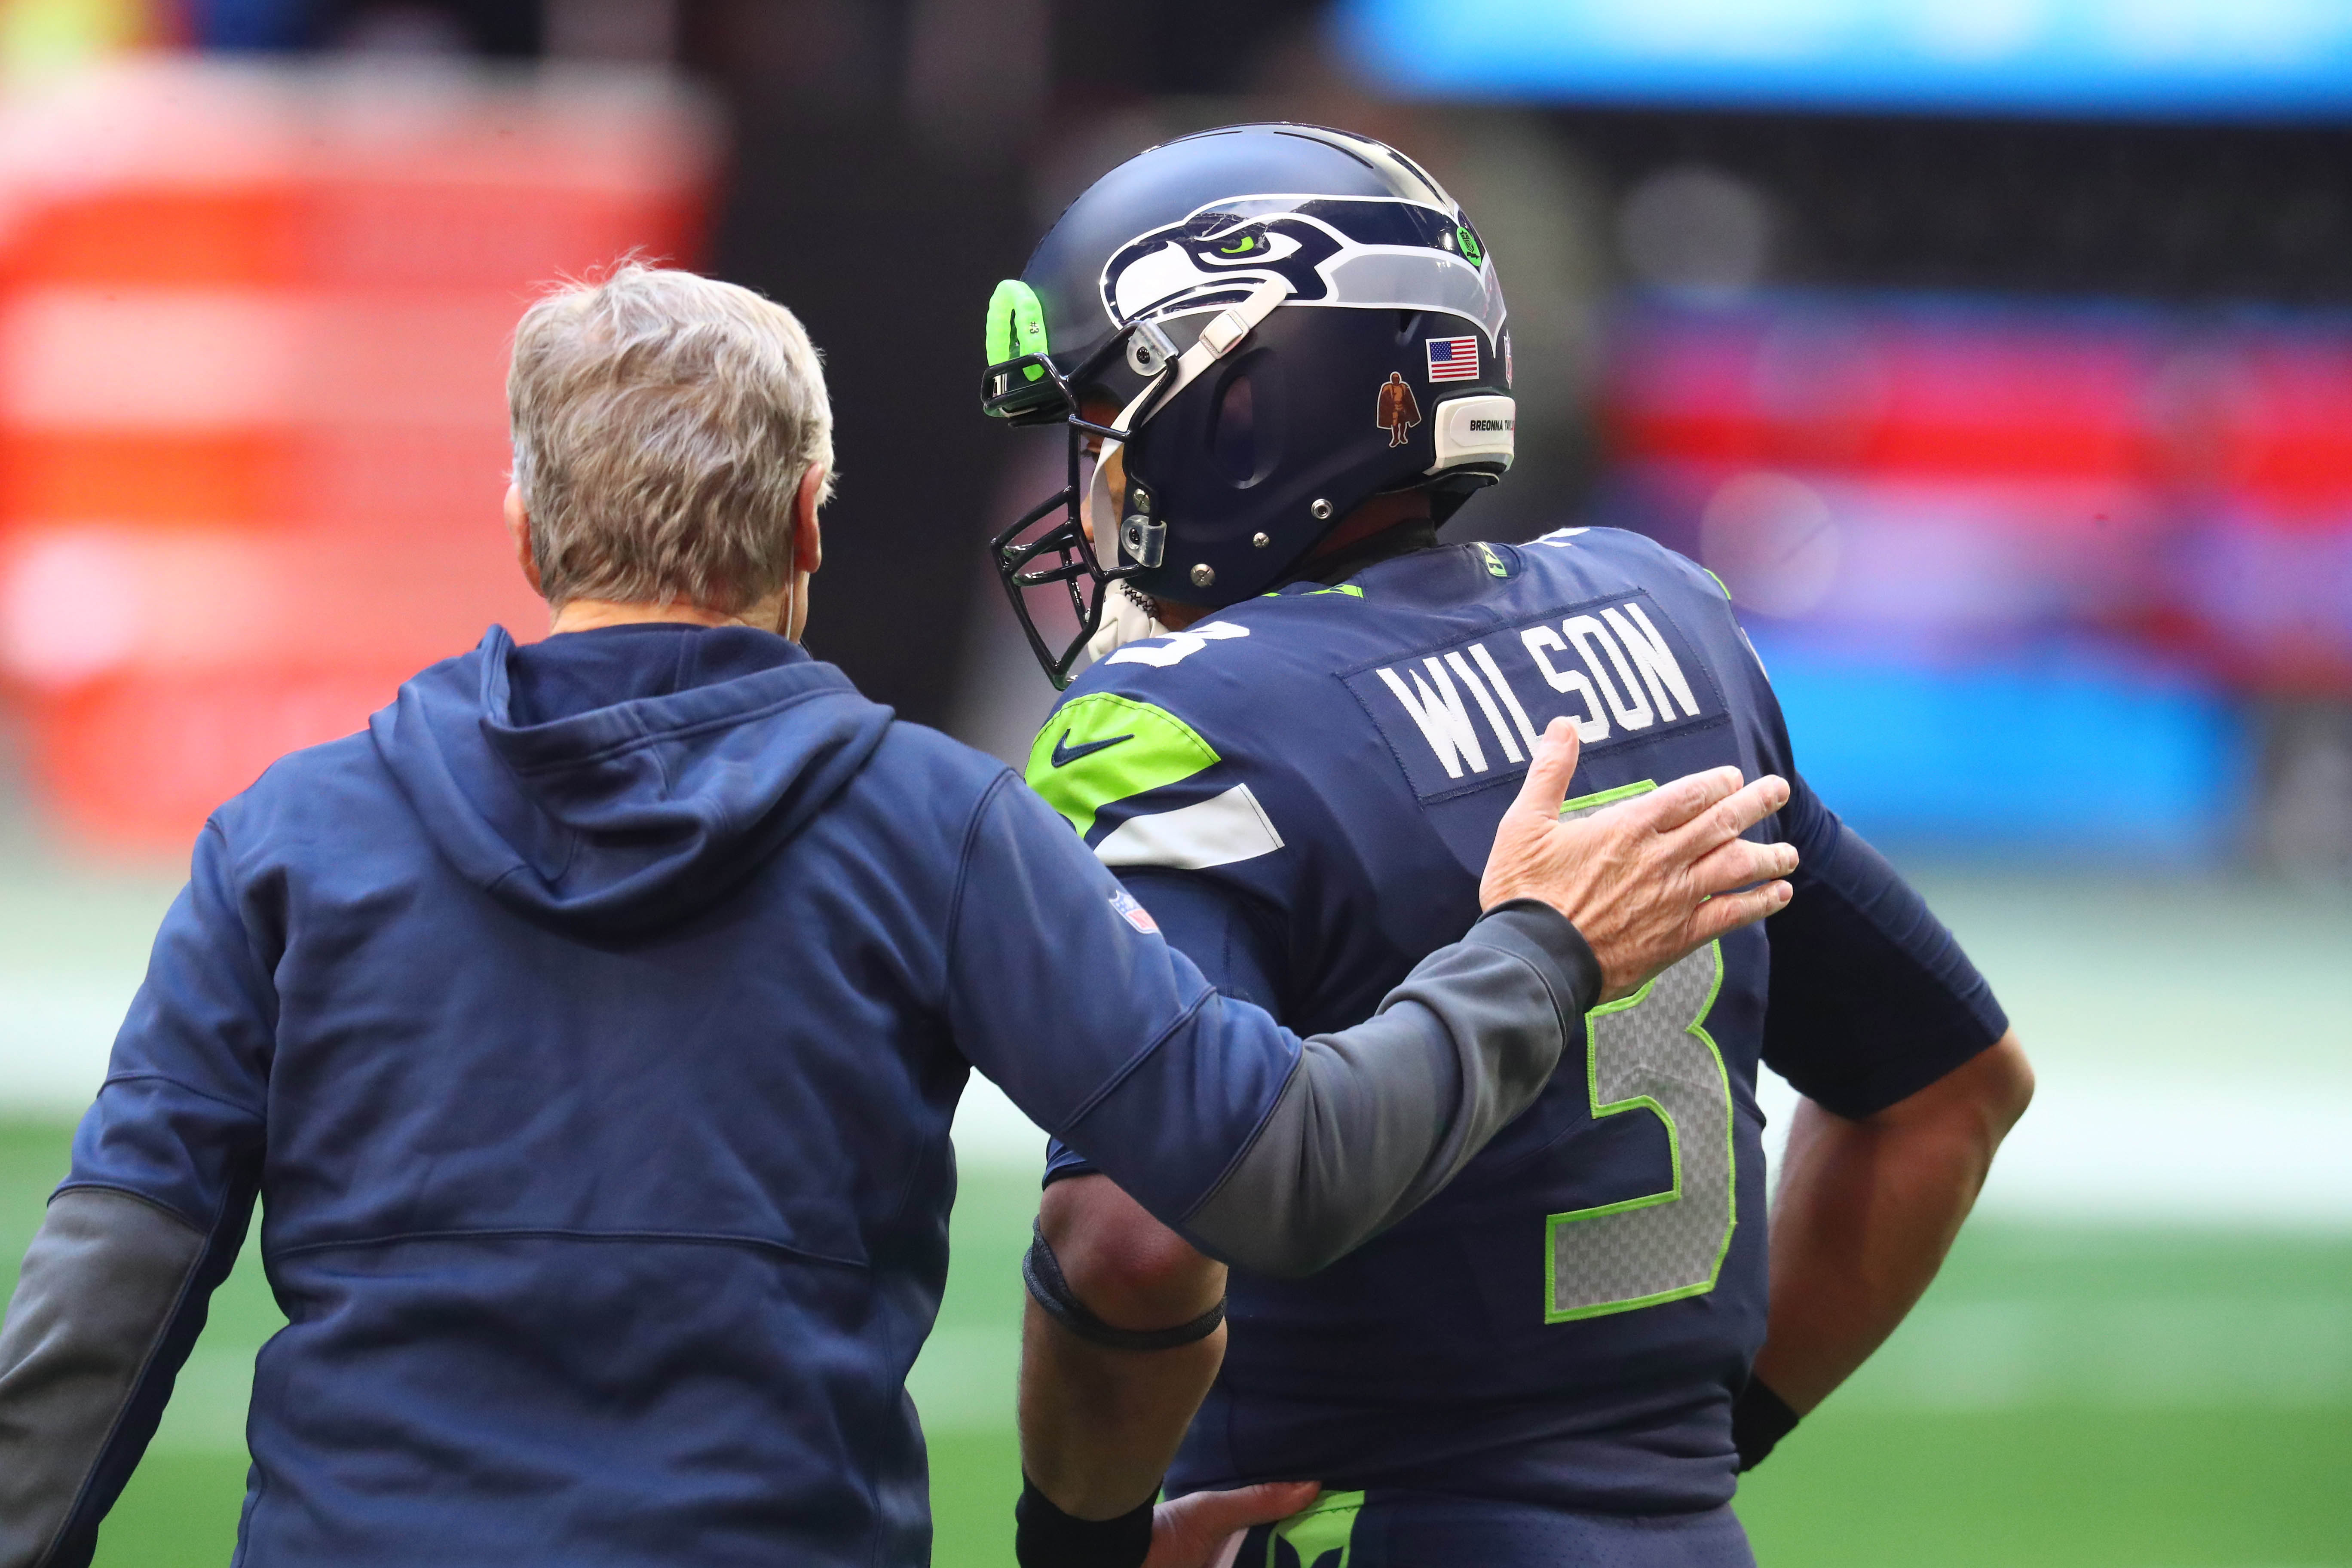 Report: Russell Wilson’s commercial drama making Seahawks unhappy